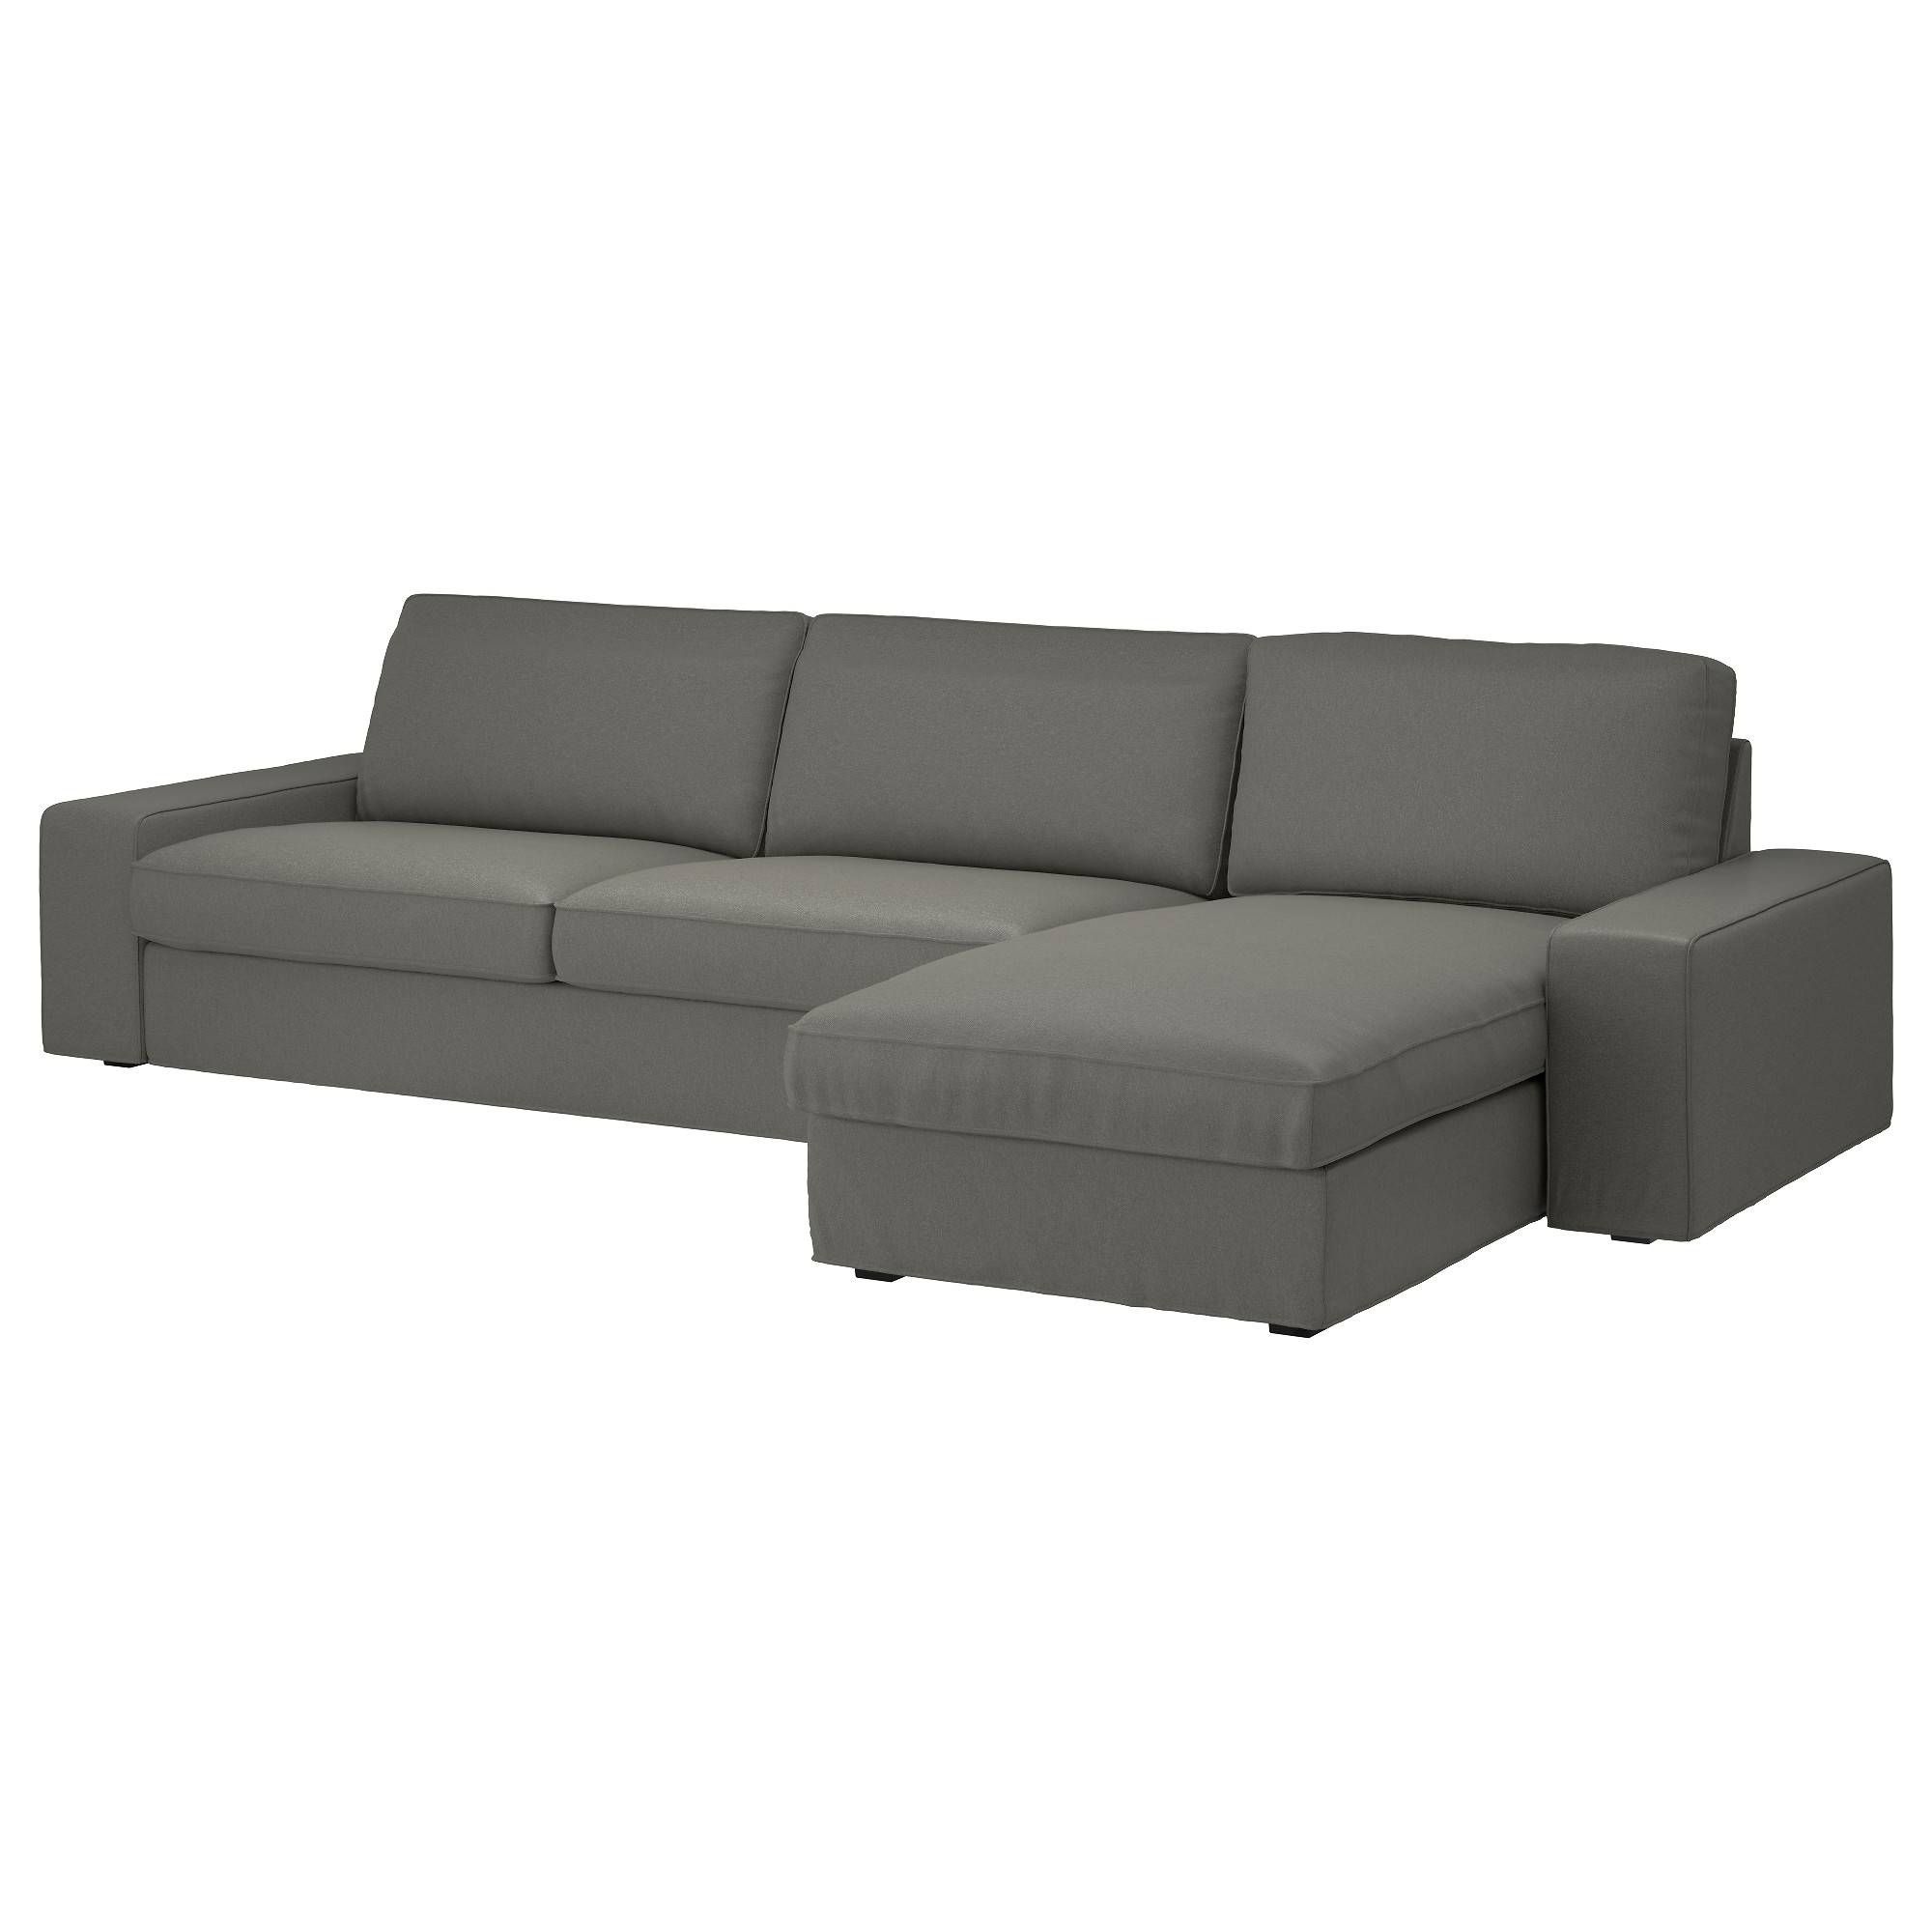 Design Your Own Sectional Sofa – Cleanupflorida Intended For Angled Sofa Sectional (View 24 of 30)